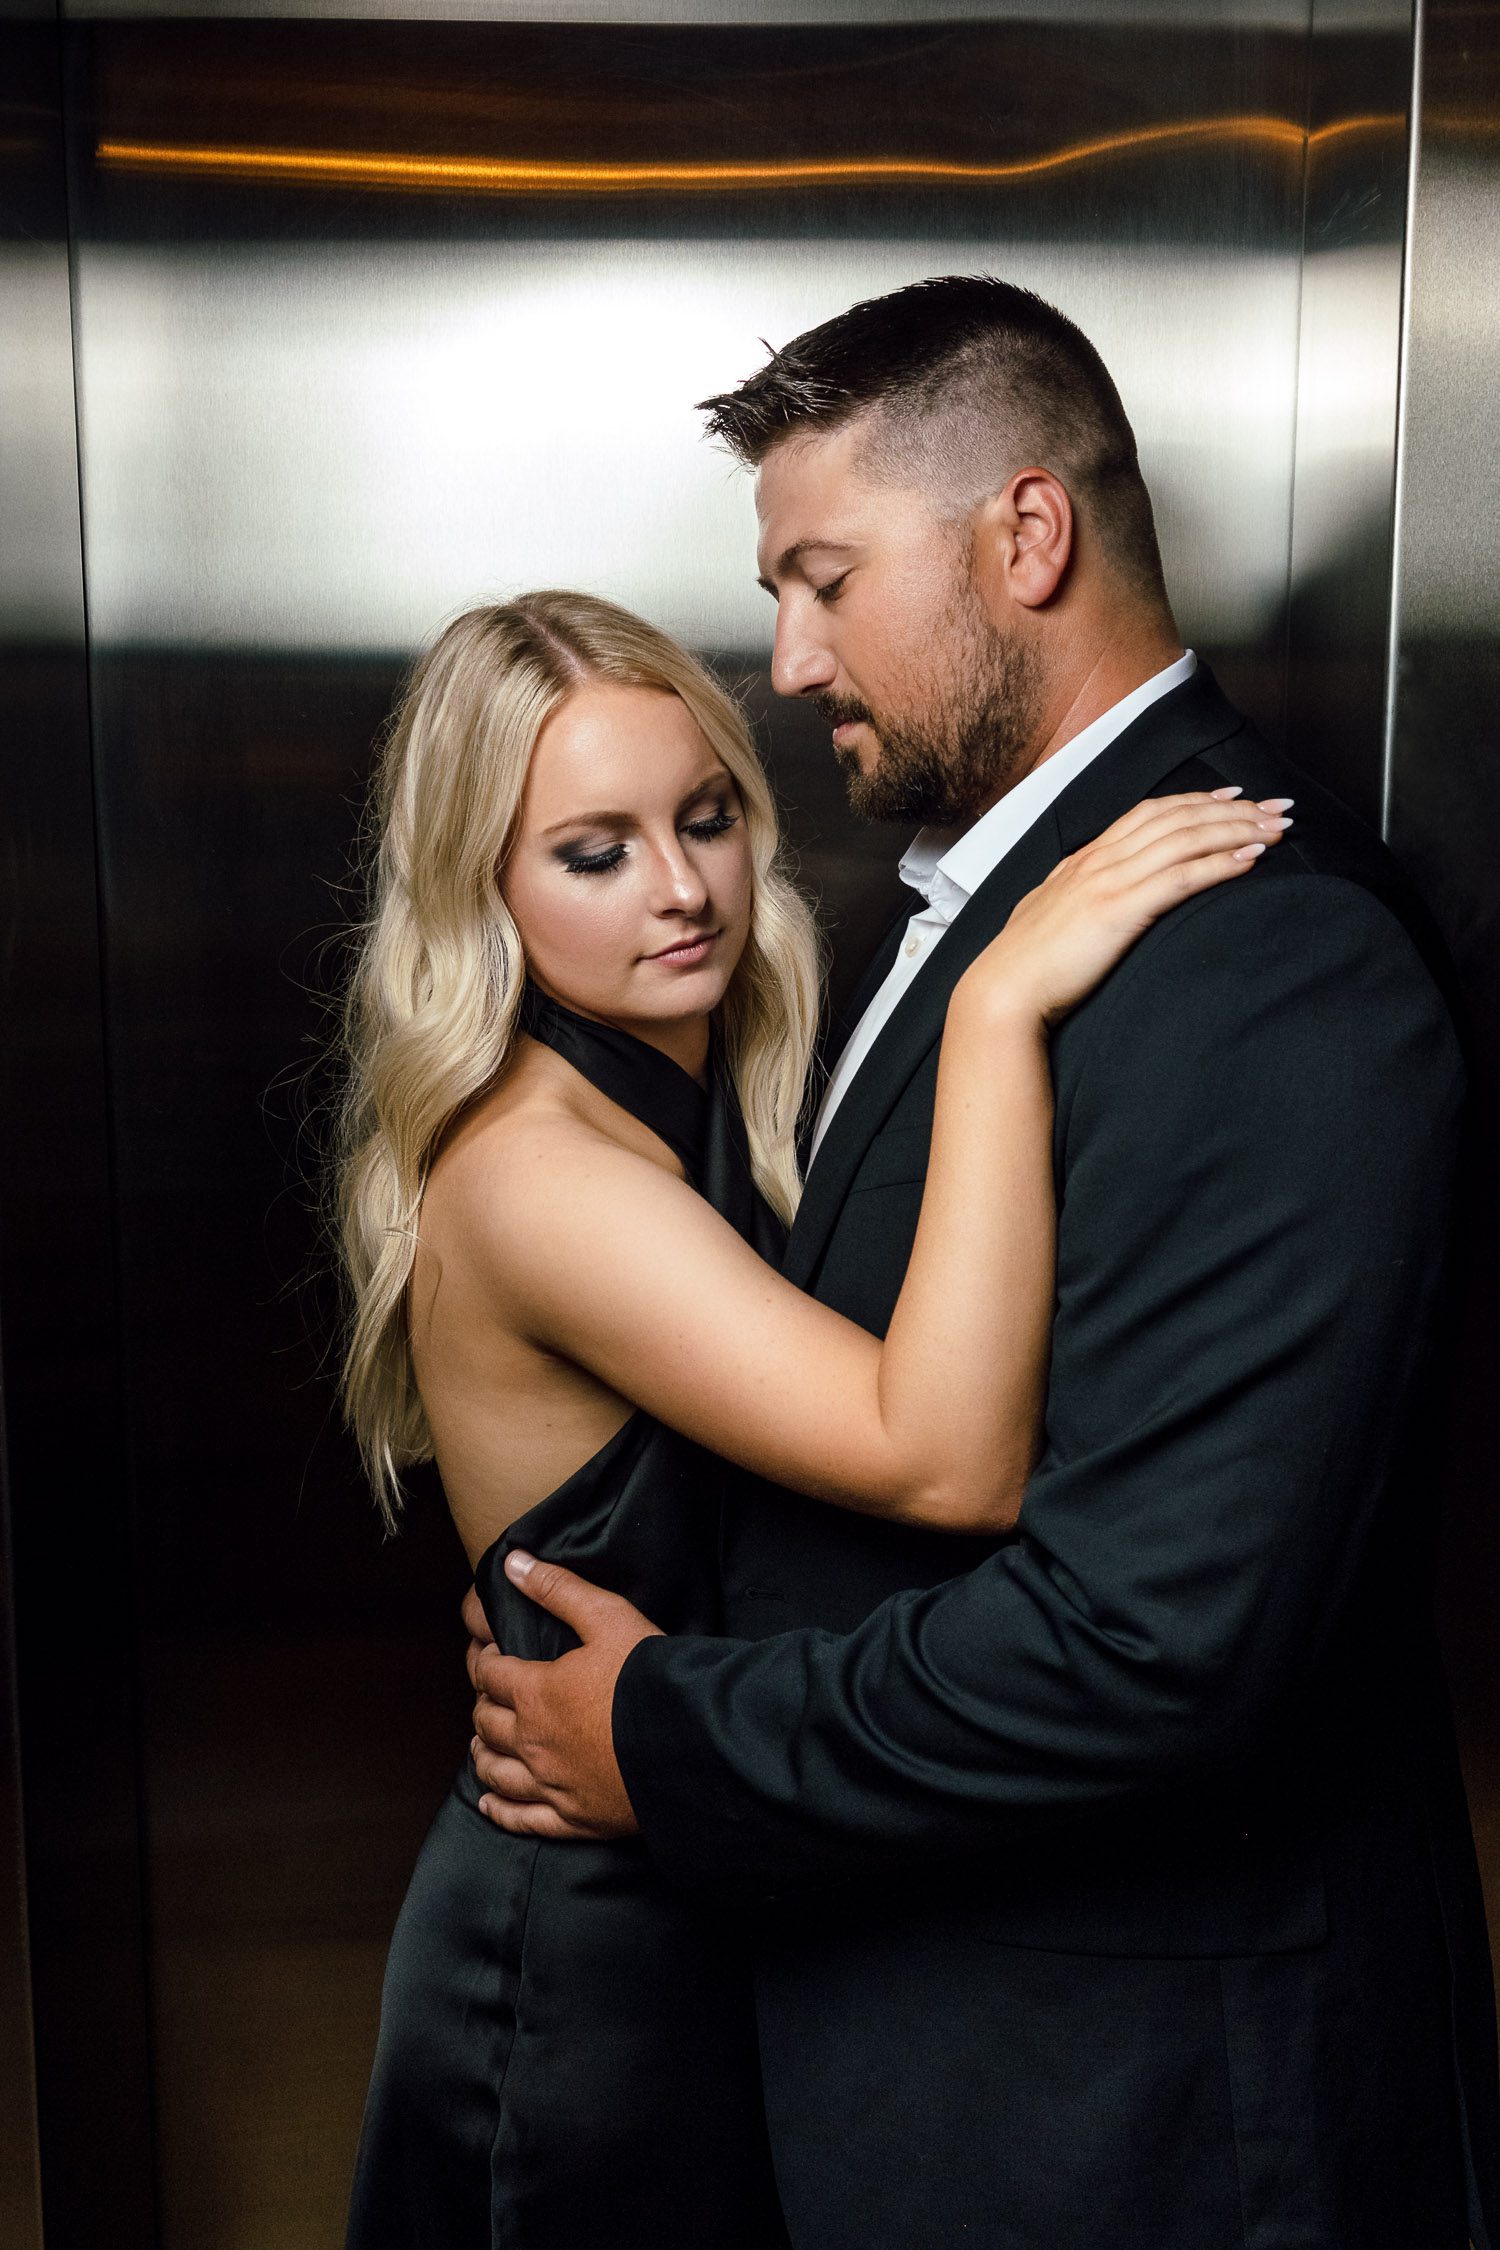 Blonde Girl and guy with beard cuddle together in elevator during engagement session

